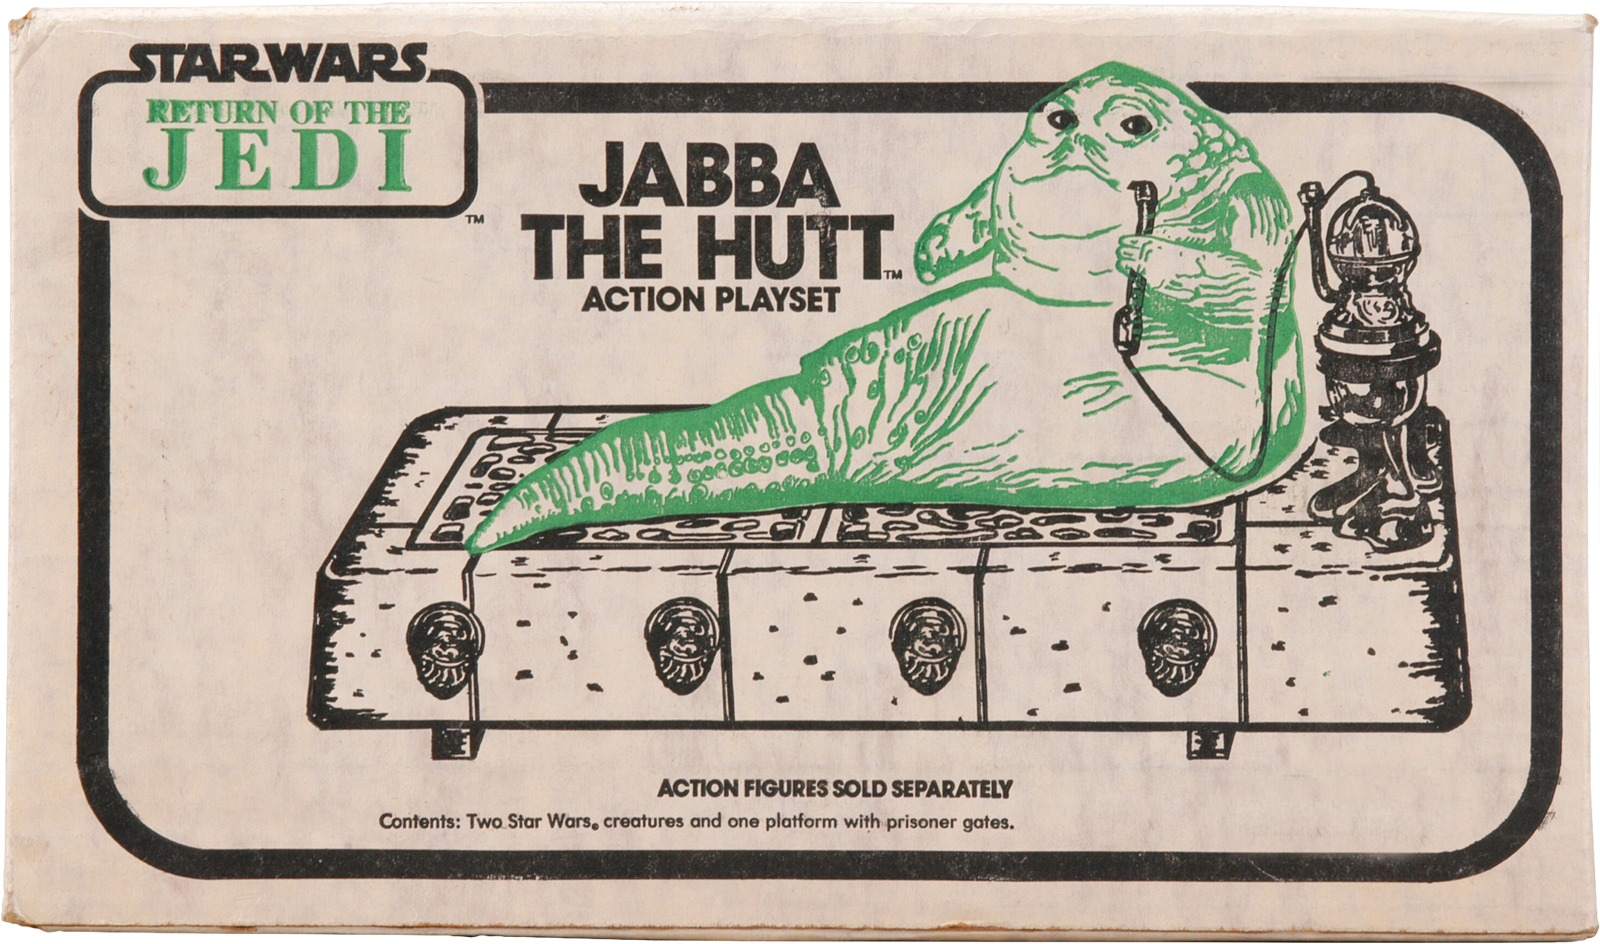 Vintage Jabba the Hutt Action Playset packaging